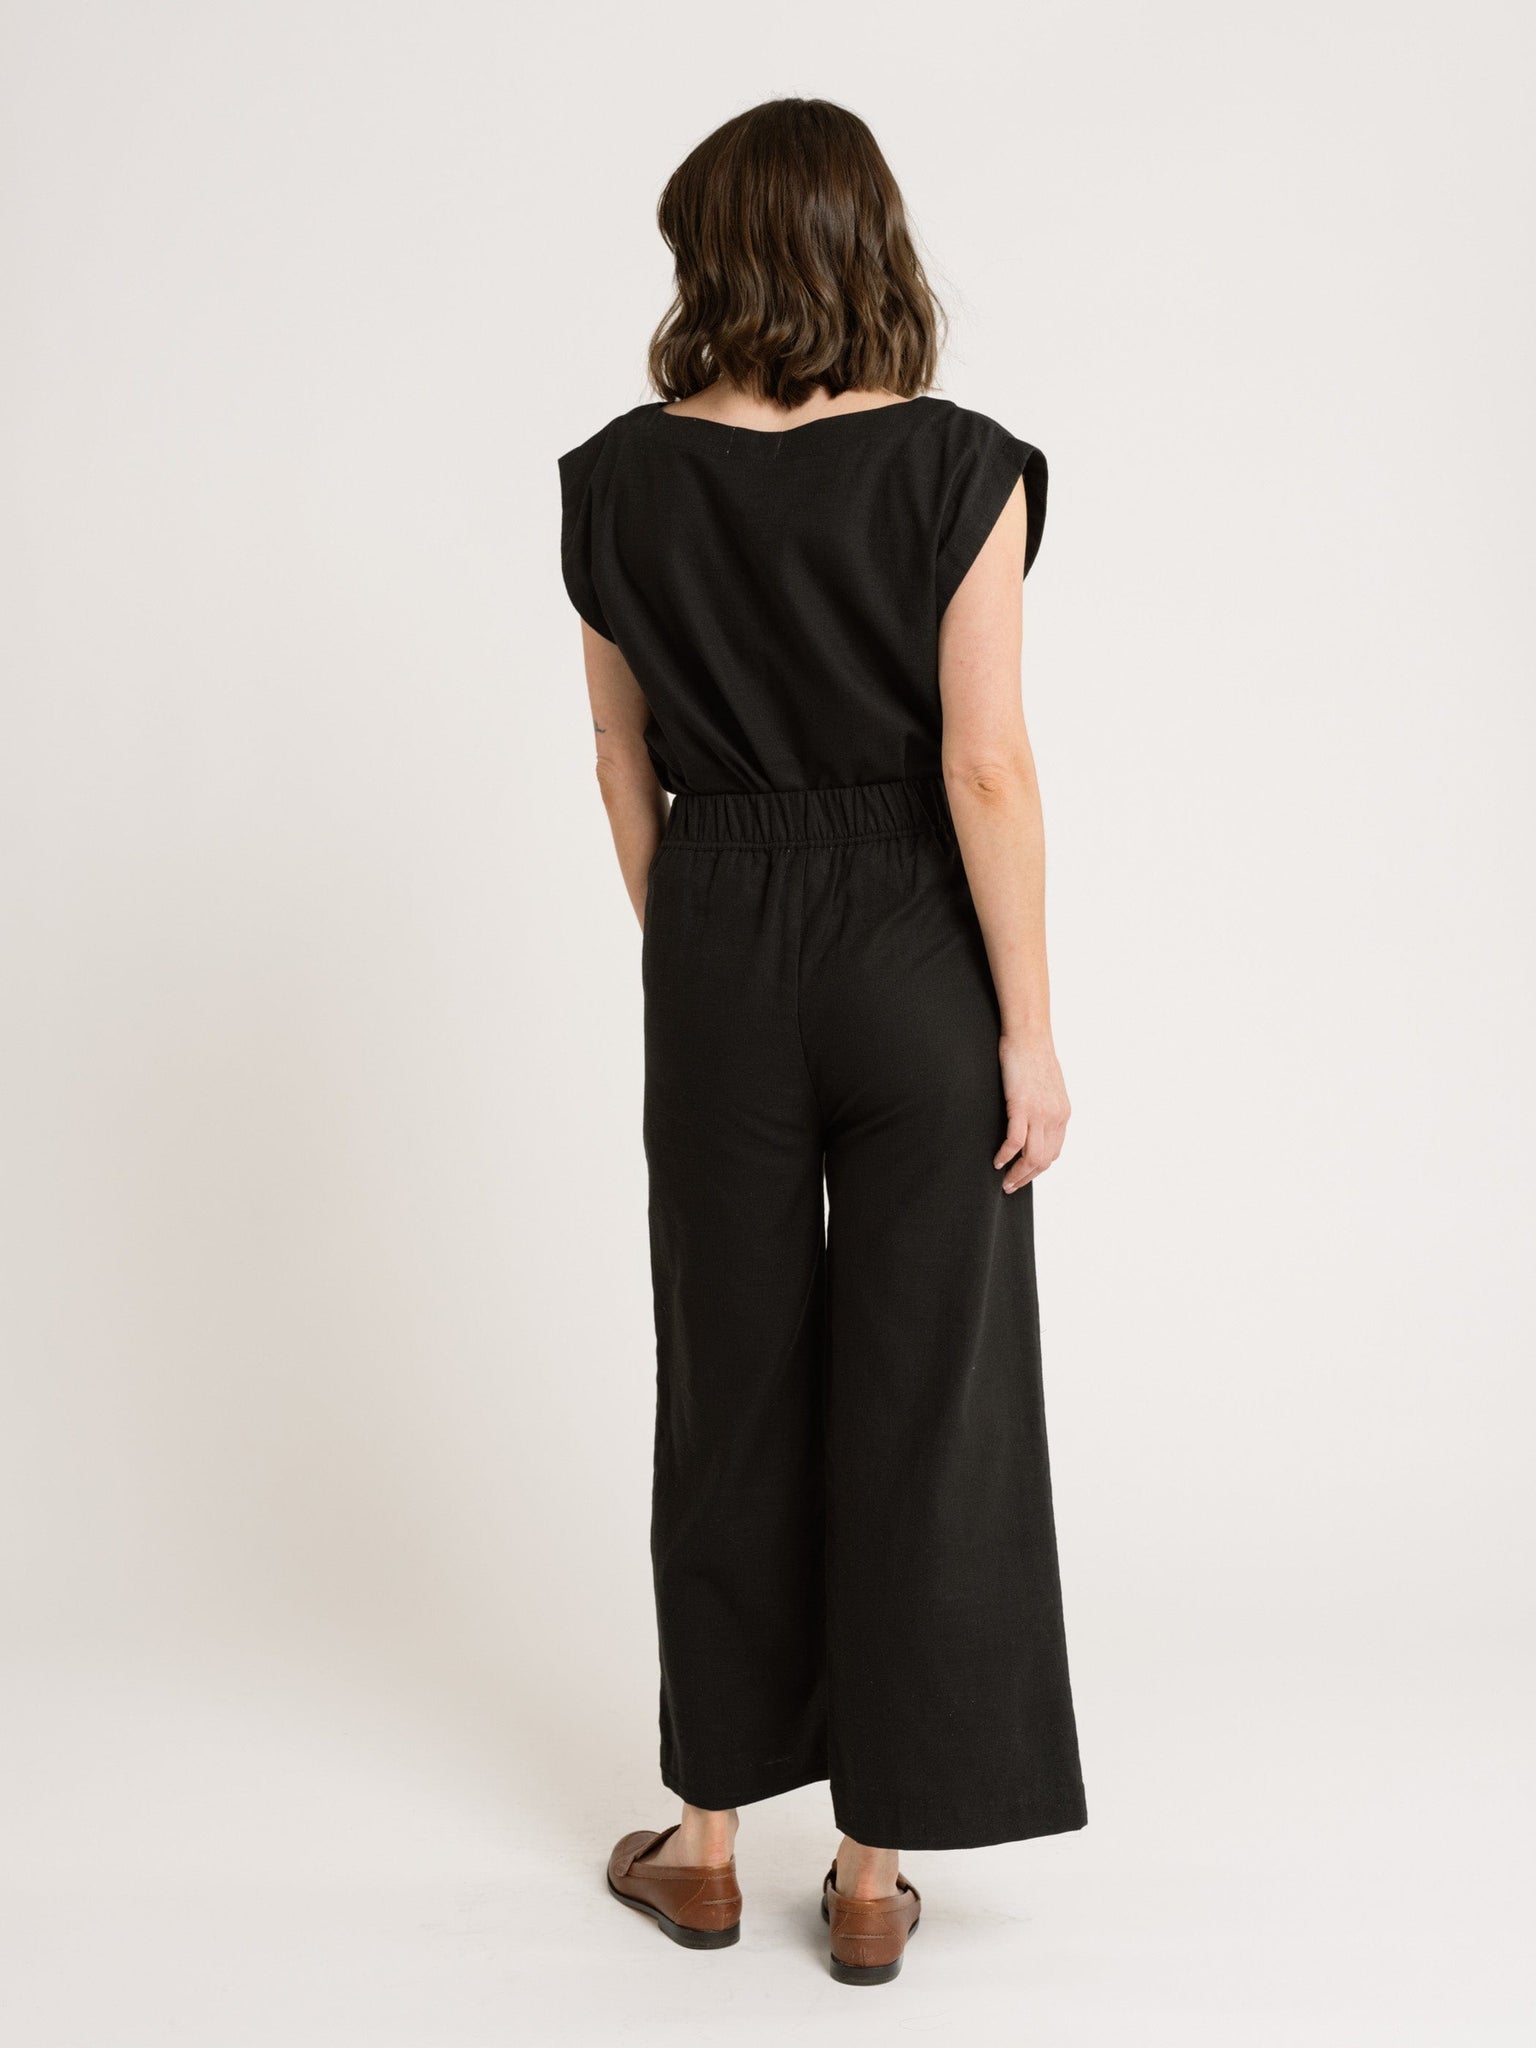 The back view of a woman wearing the Everyday Top - Black Cotton jumpsuit.